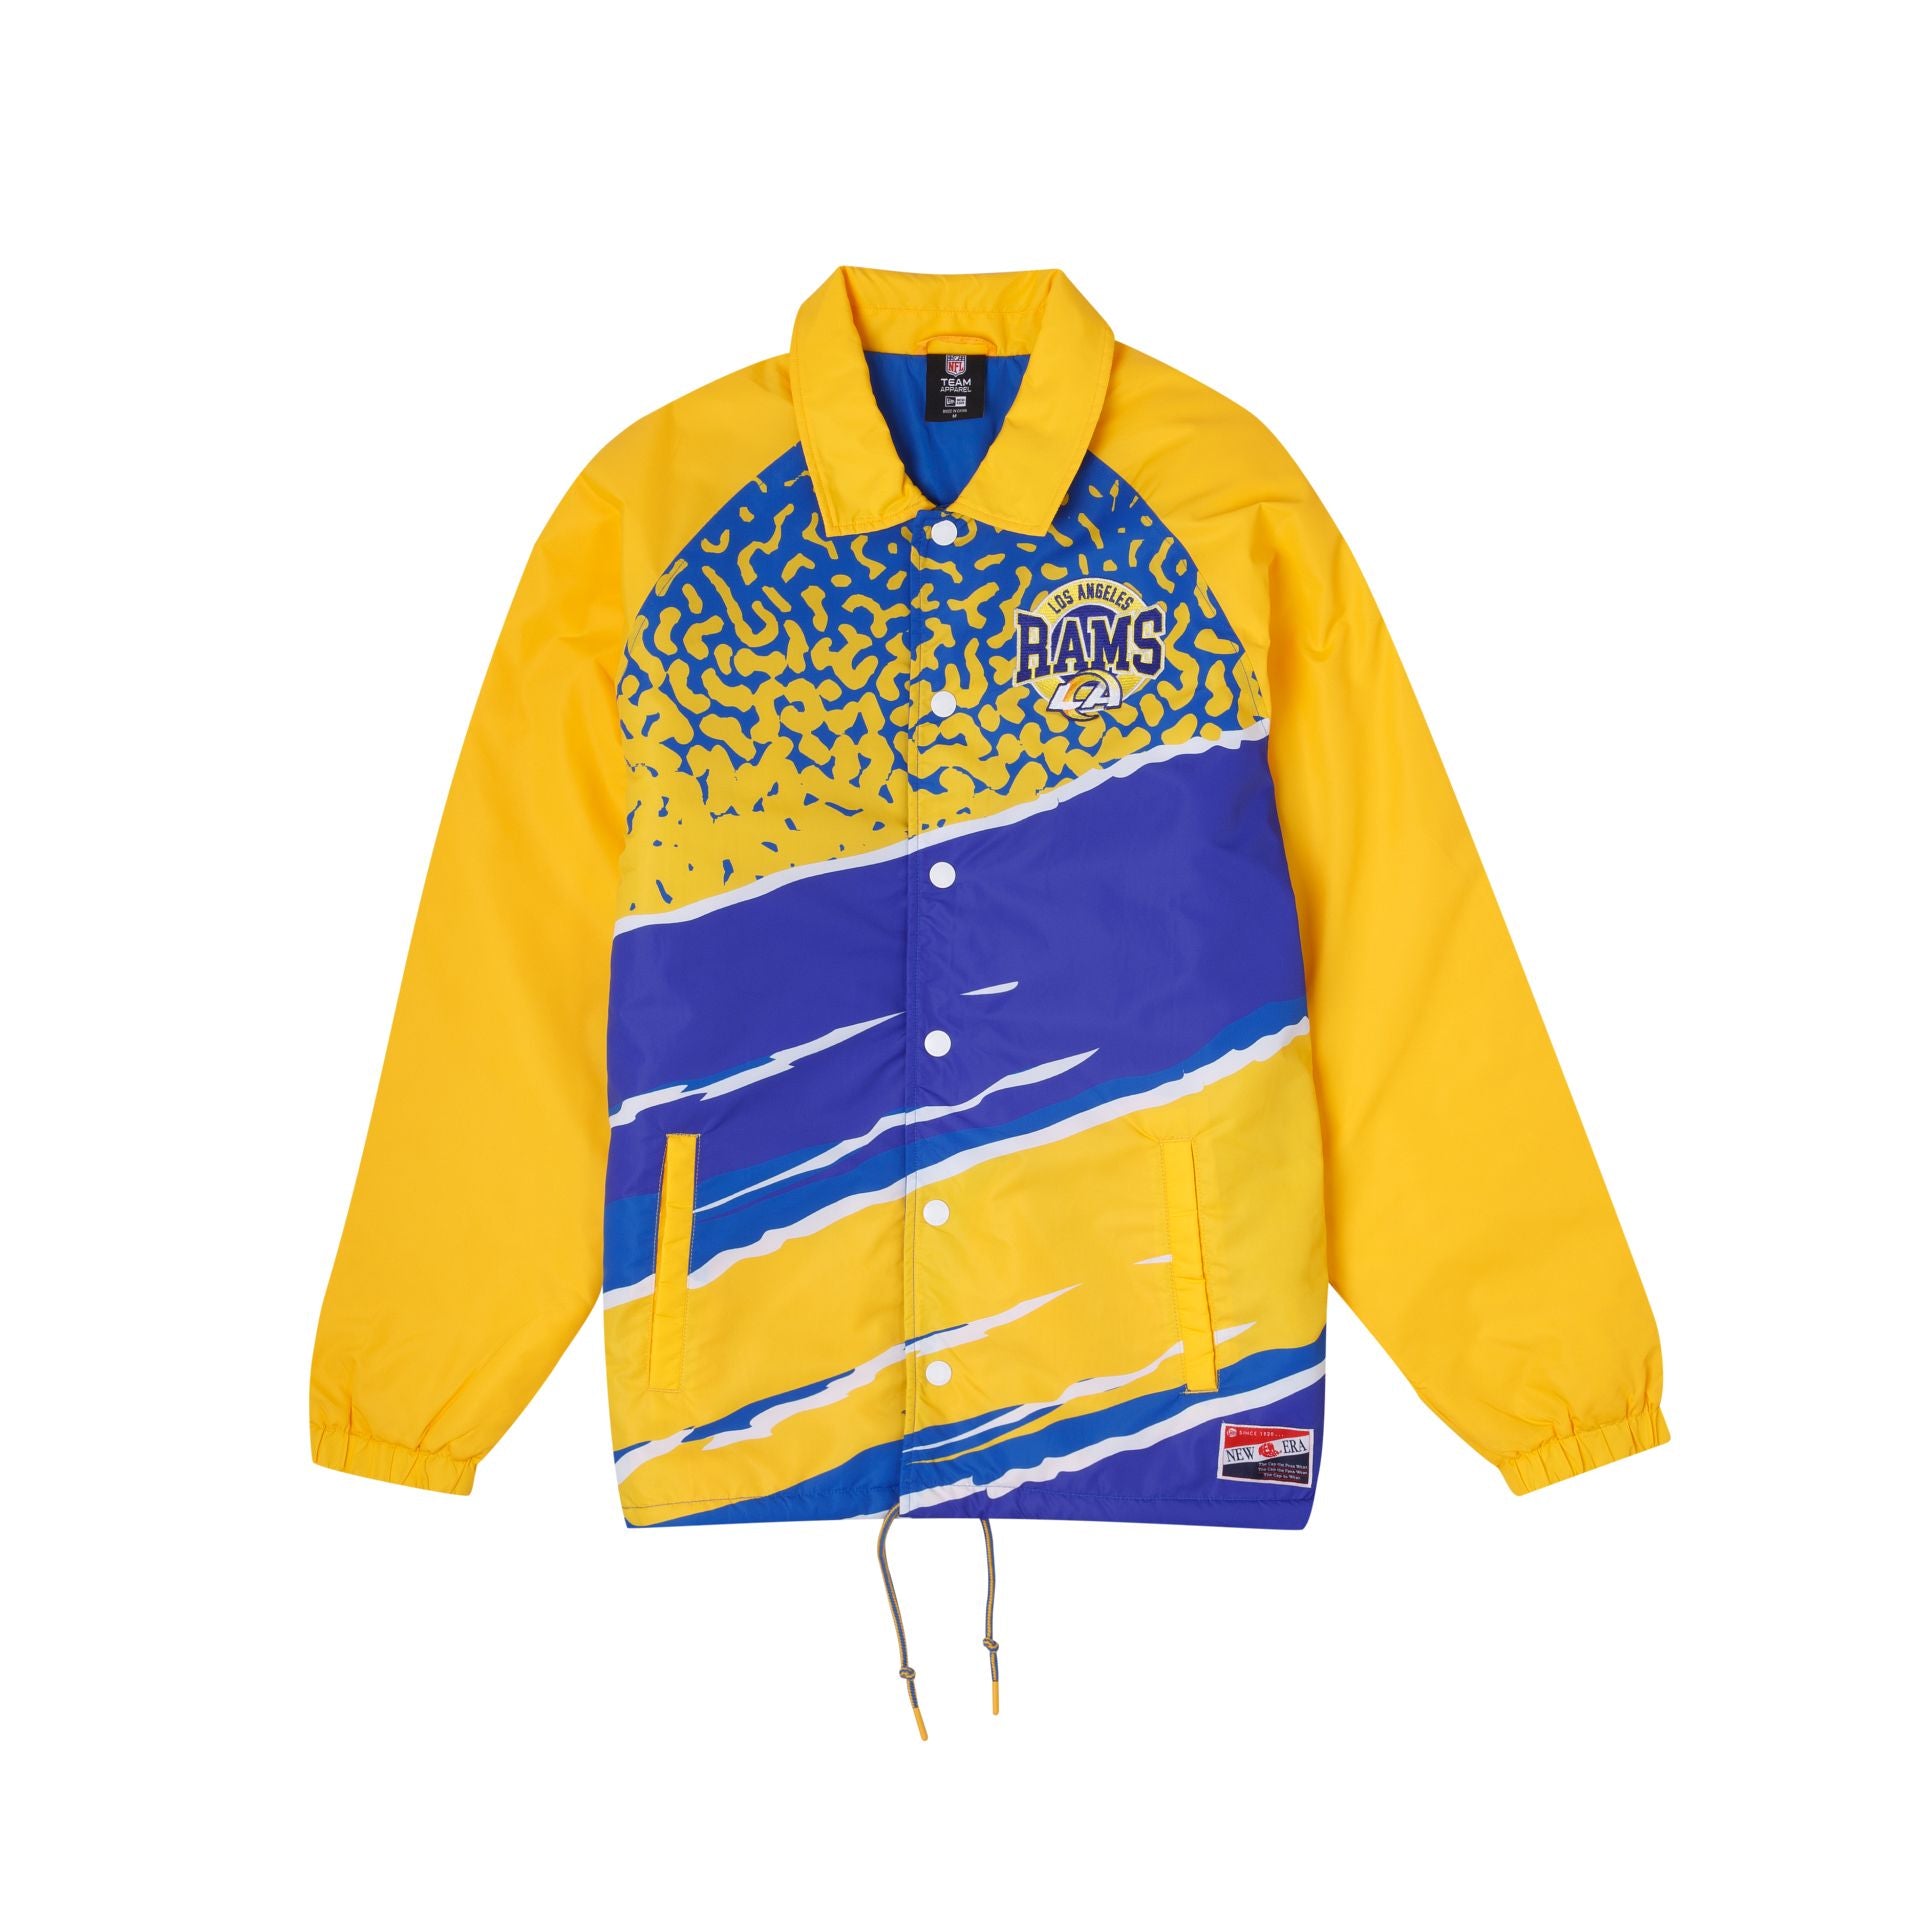 Los Angeles Rams Throwback Jacket - Size: S, NFL by New Era